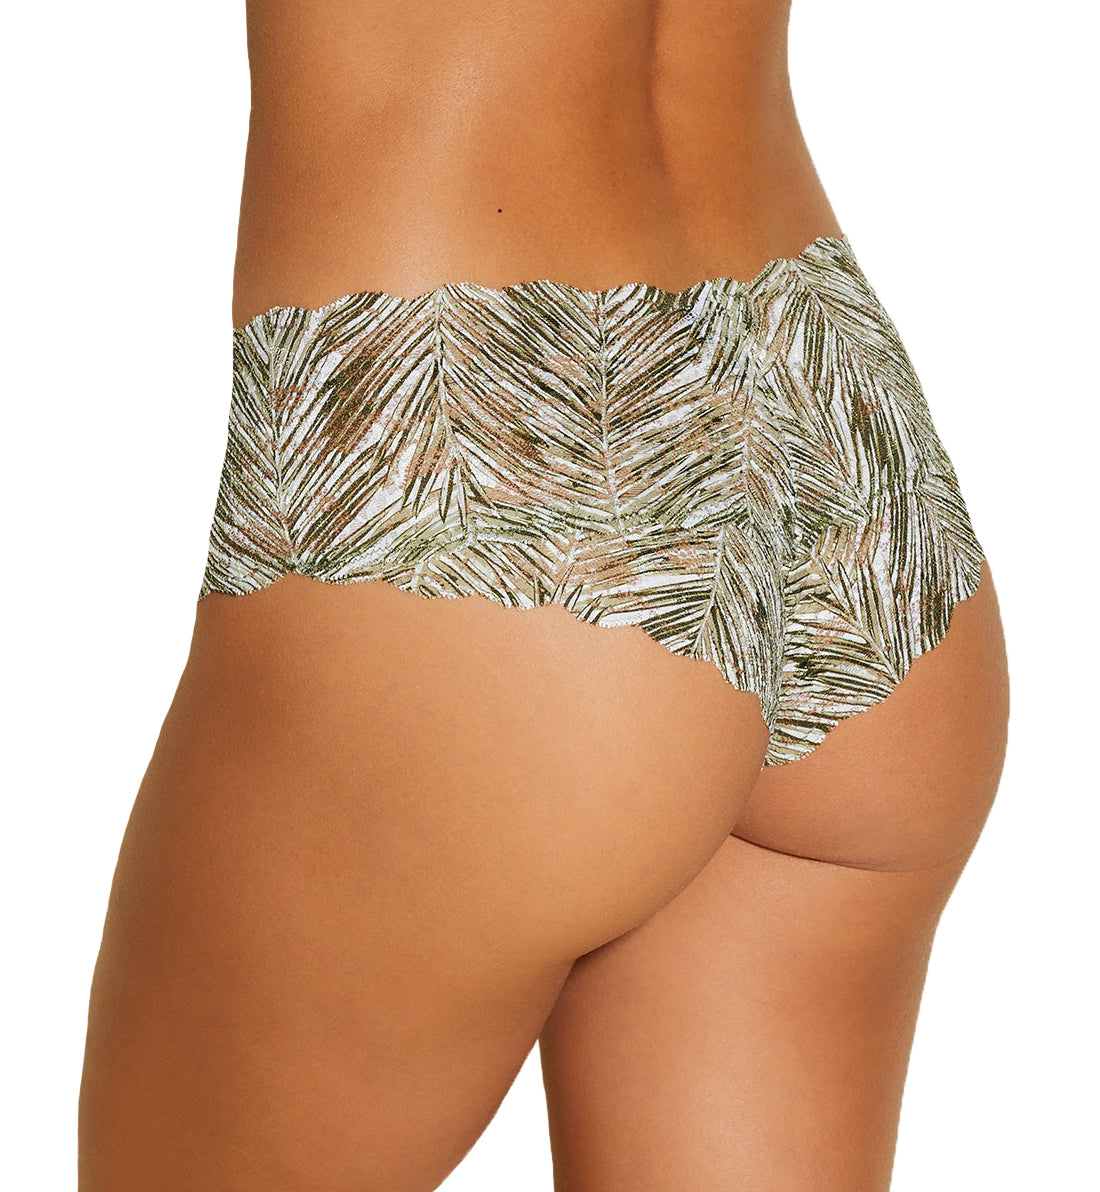 Cosabella Never Say Never Printed Hottie Lowrider Hotpant (NEVEP07ZL),S/M,Palm Aloe - Palm Aloe,S/M